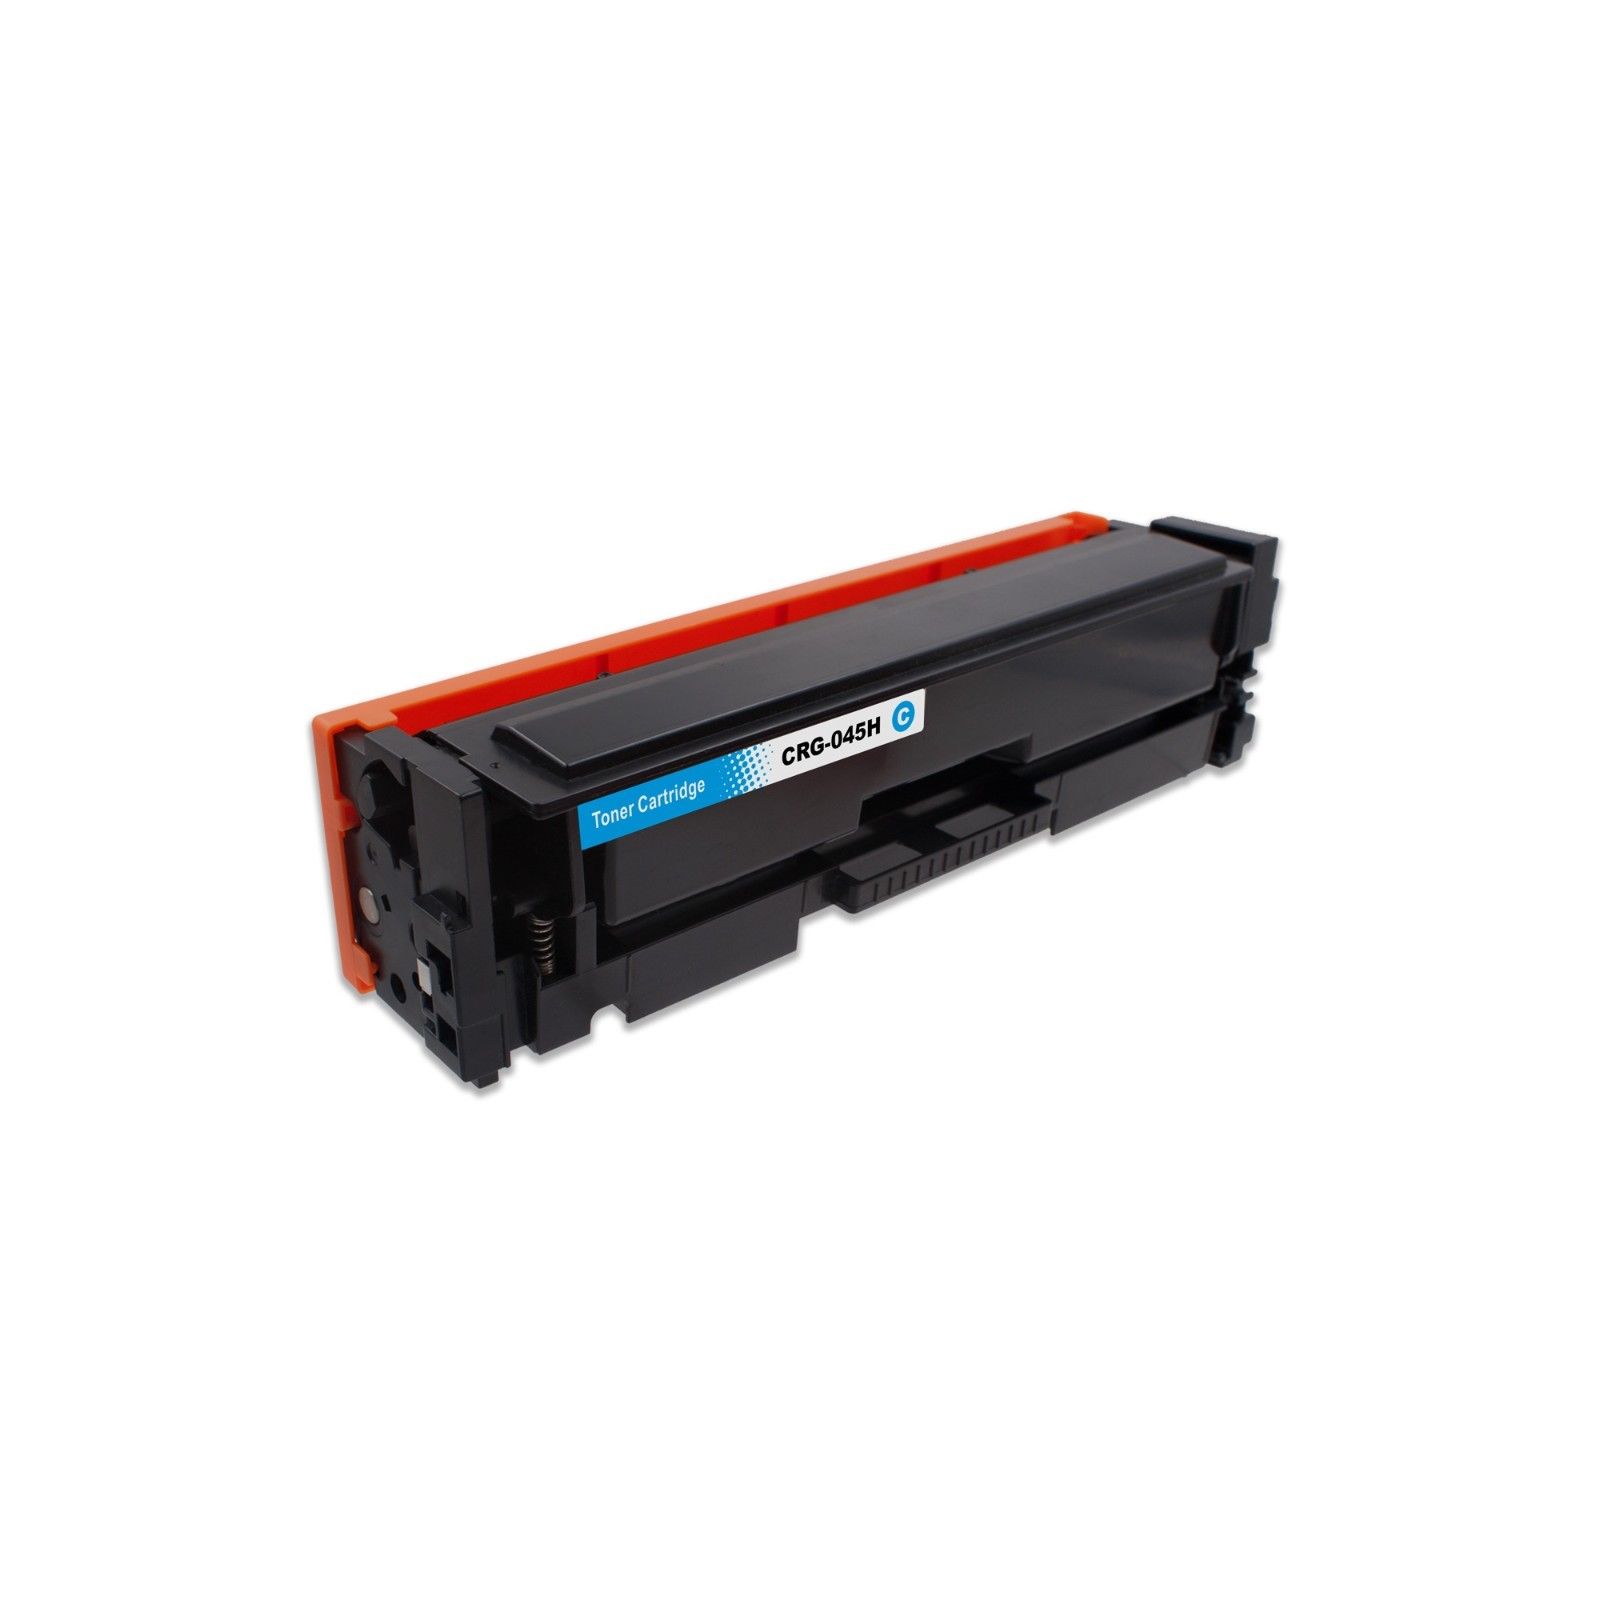 CANON 045H 1245C001 CYAN Compatible Toner 2300 Pages 612cdw ImageClass MF634cdw MF632cdw